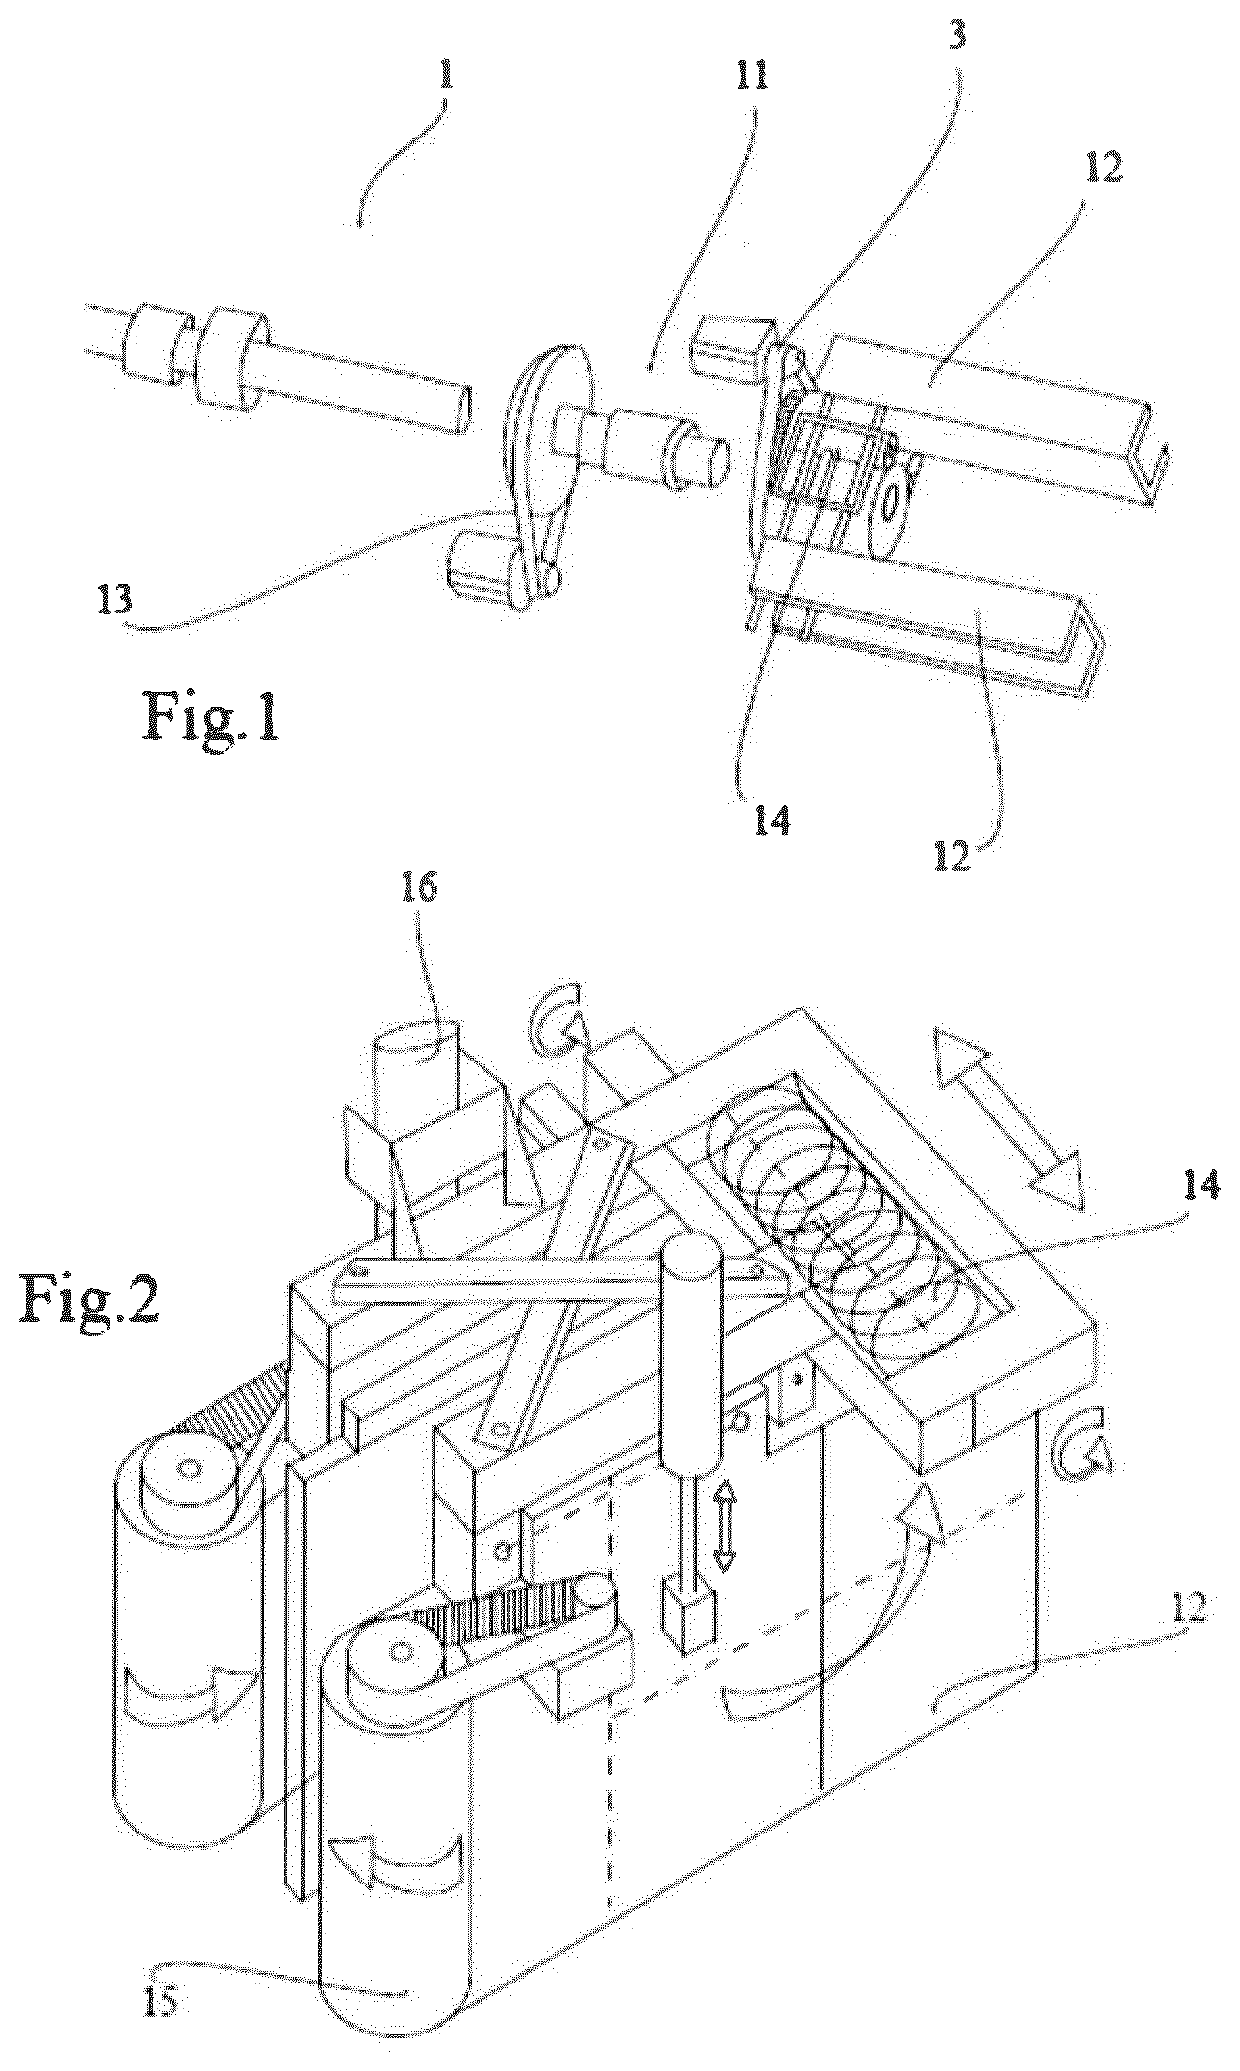 Concrete structure manufacturing apparatus and method